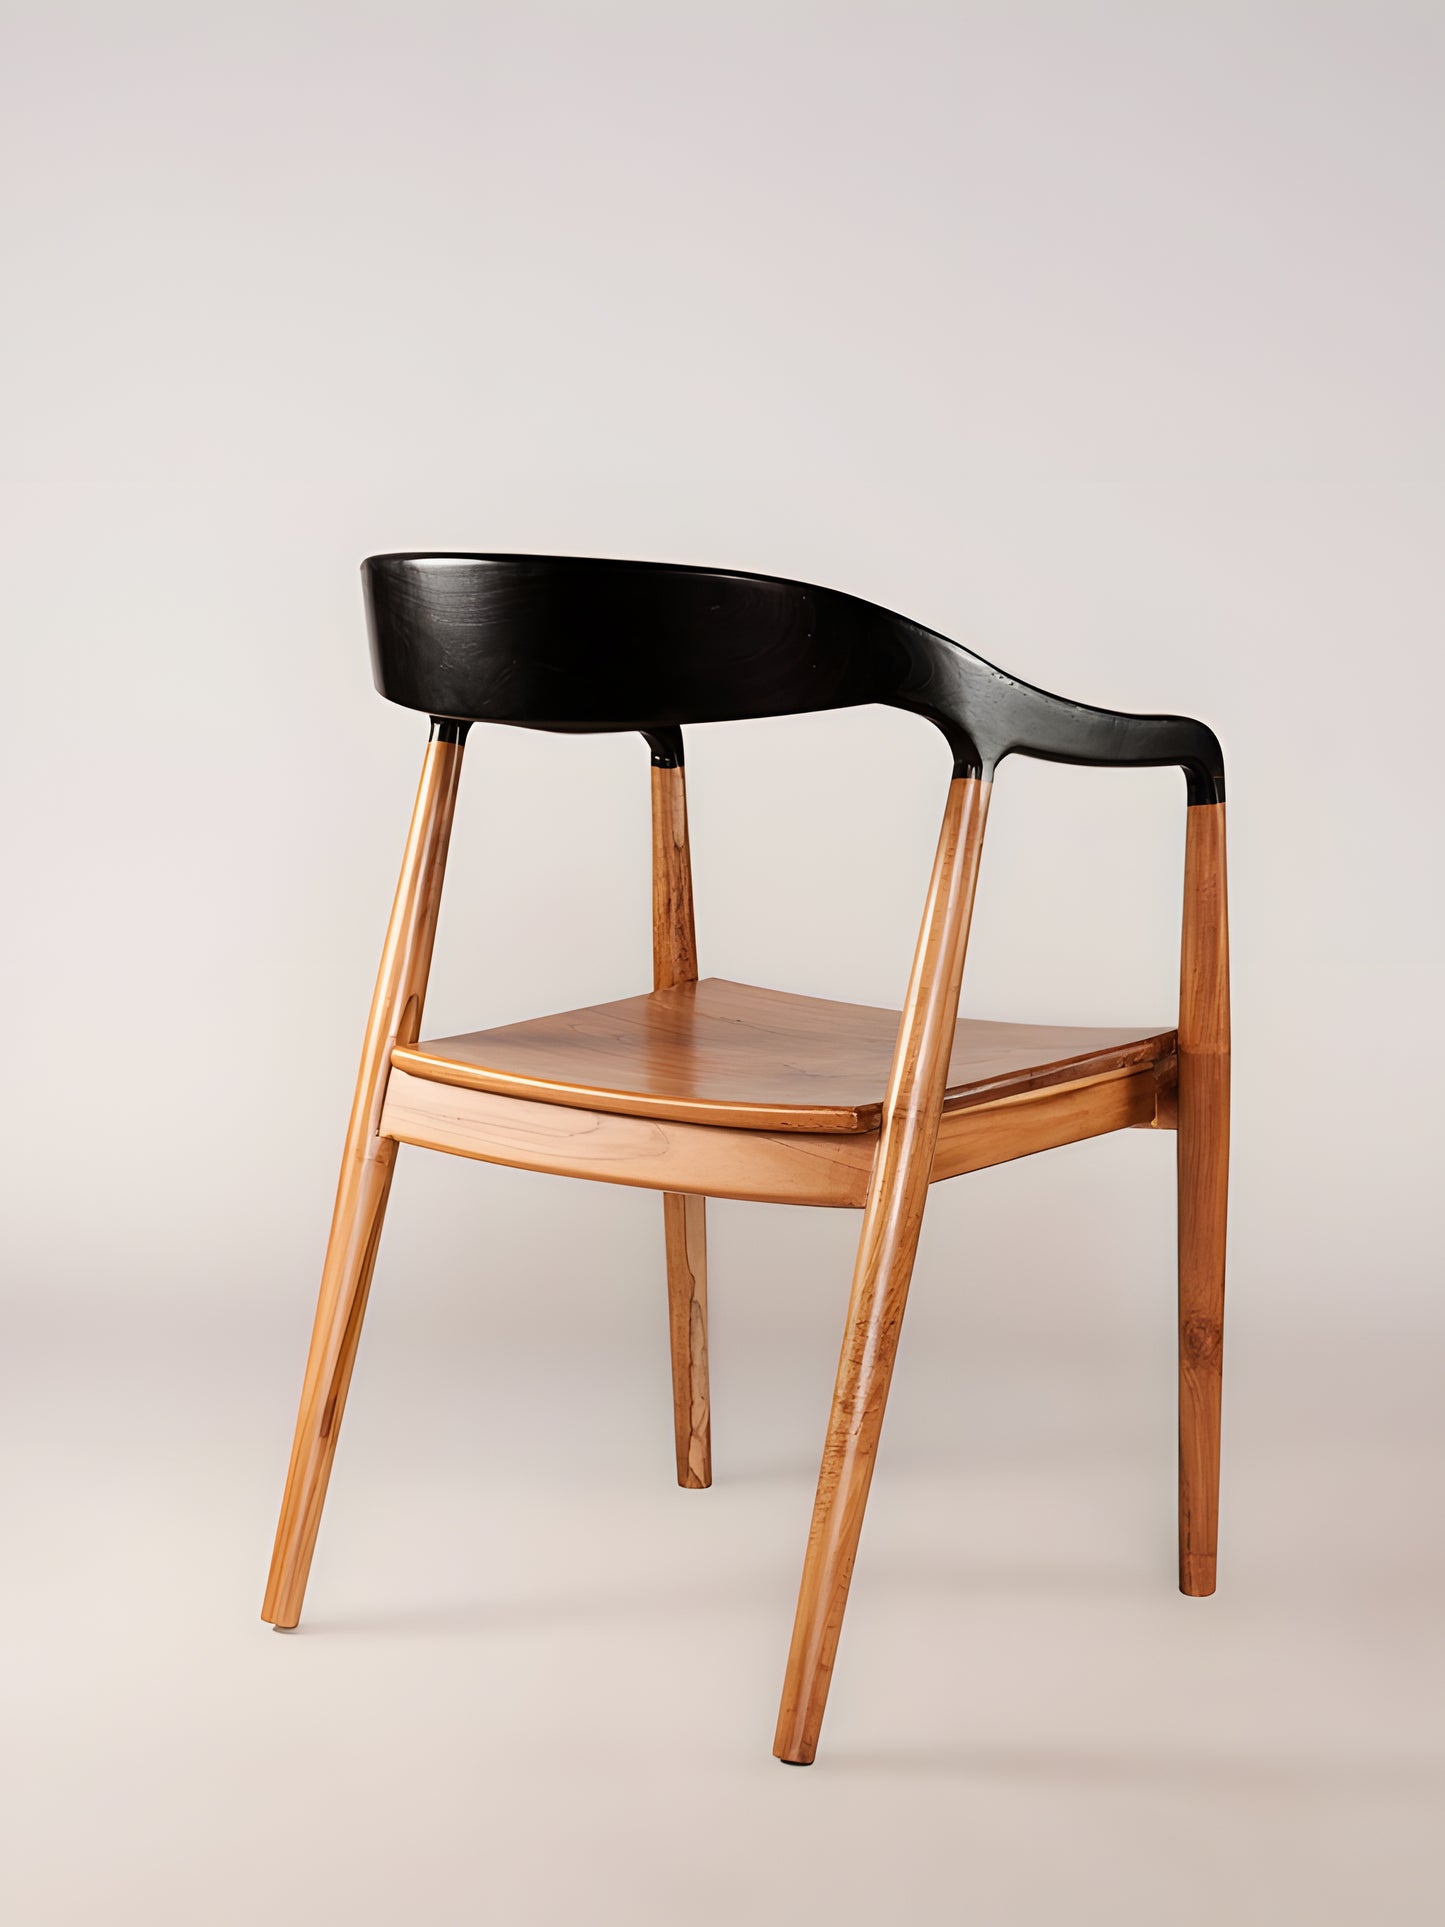 Jacobo Teakwood Curved Back Dining Chair with armrest in dark choco colour back view by Mellowdays Furniture